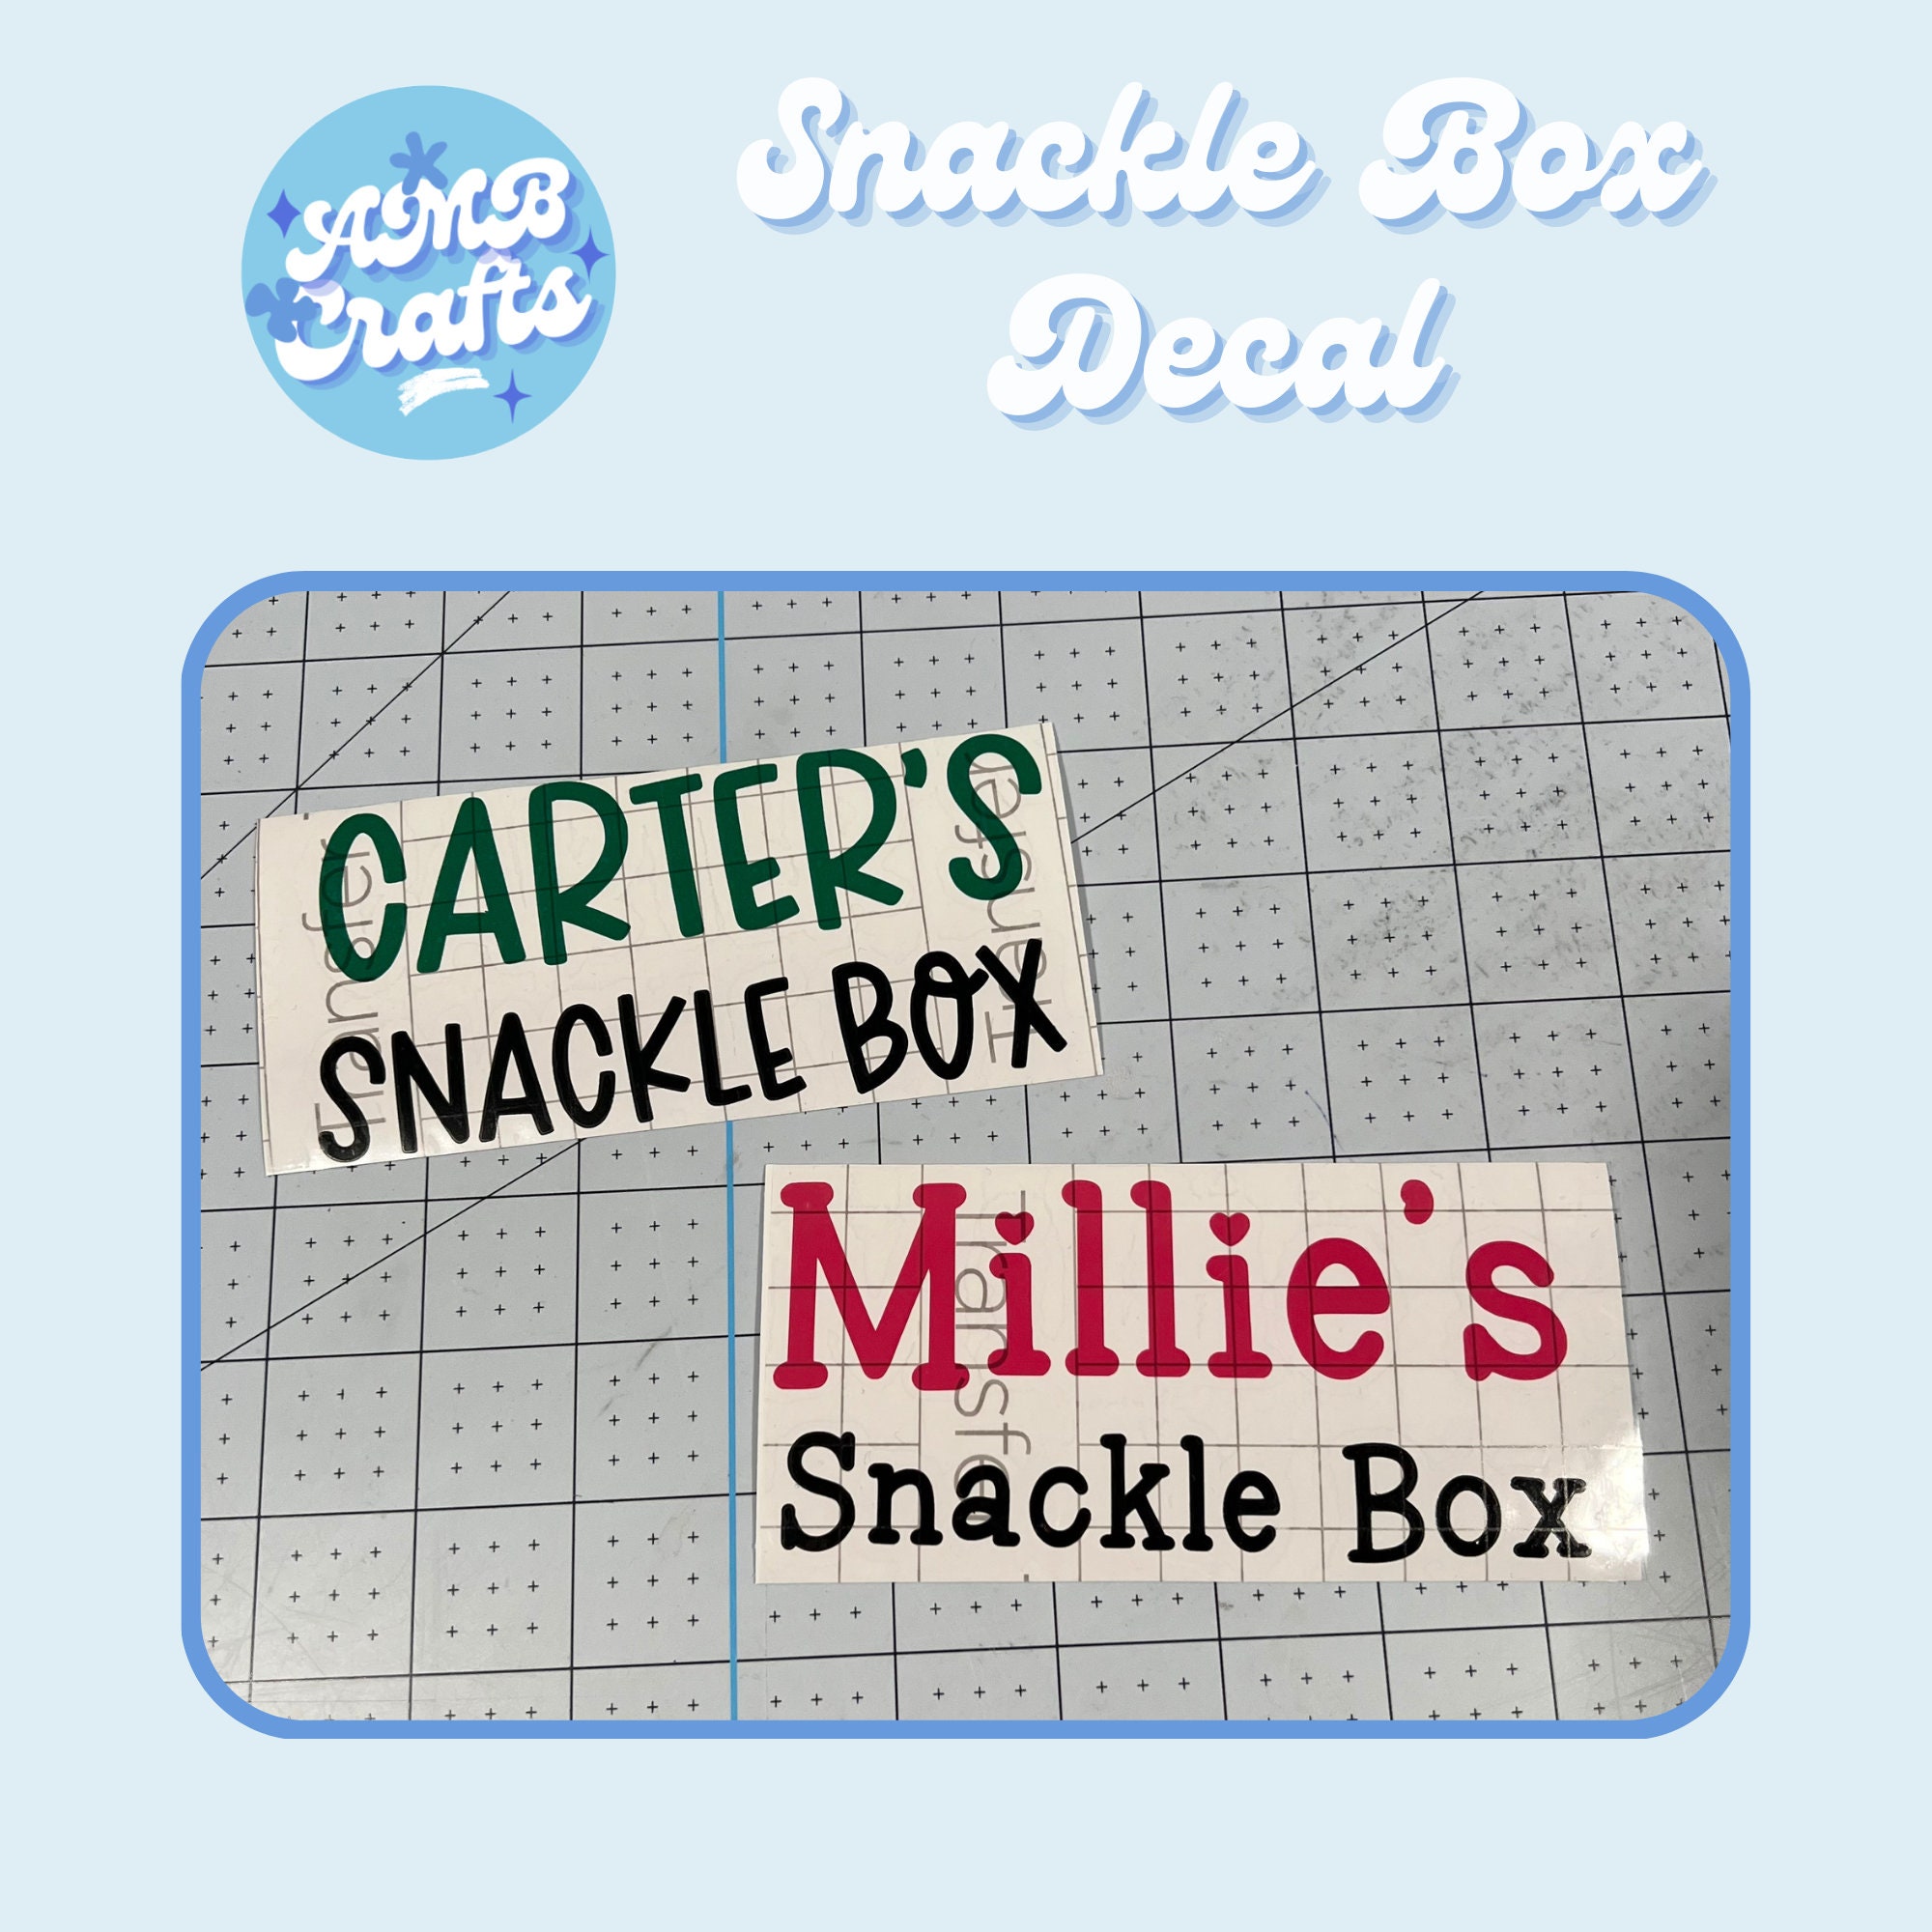 Personalized Snackle Box Decal, Snack Box Decal, Charcuterie Box Decal,  Custom Decal, Child Gift, Teacher Gift, Vinyl Decal 